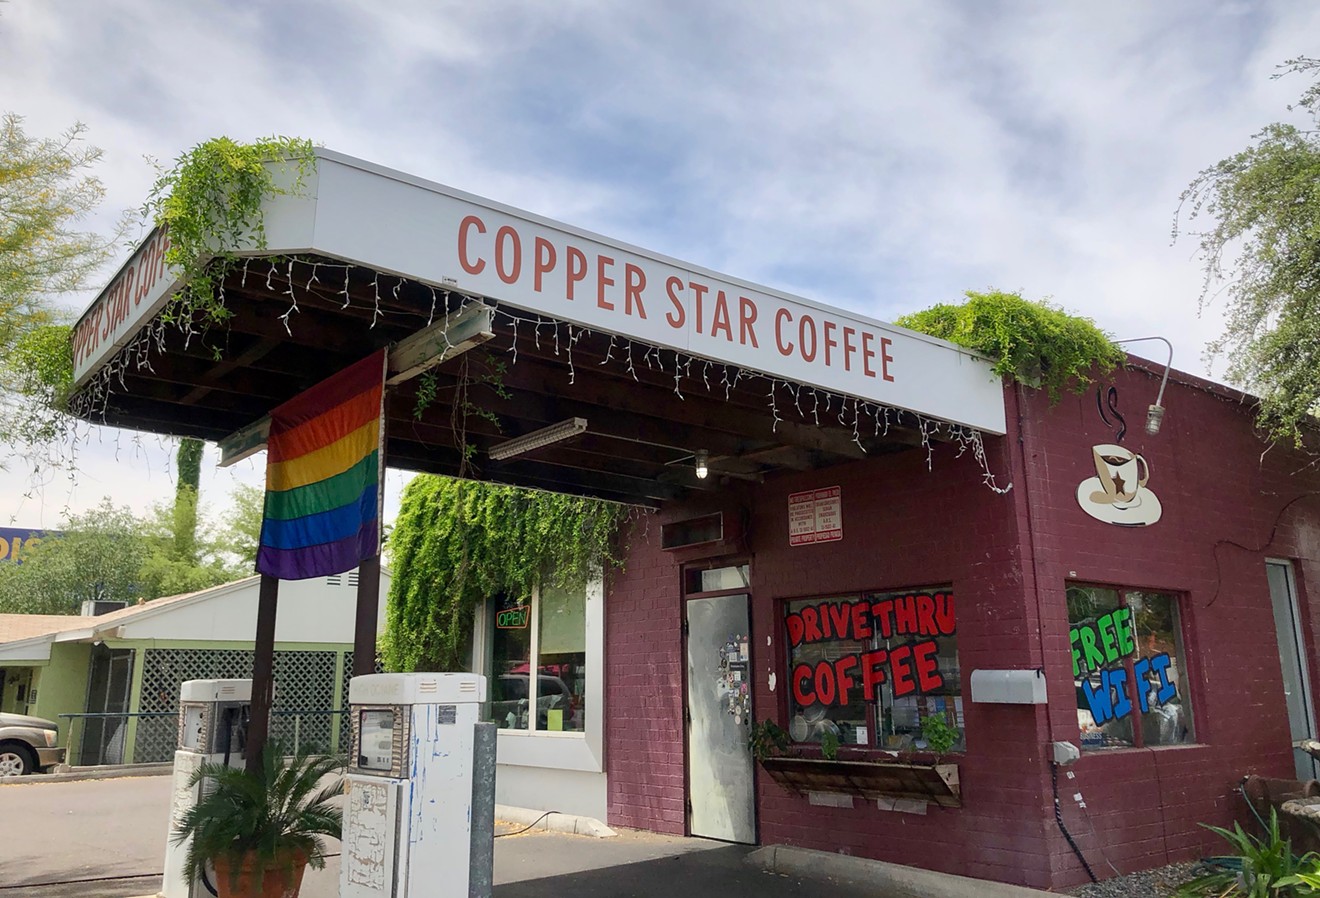 Copper Star Coffee has received media coverage for paying to bring in rapid COVID-19 tests. There are questions about the effectiveness of some of the tests.